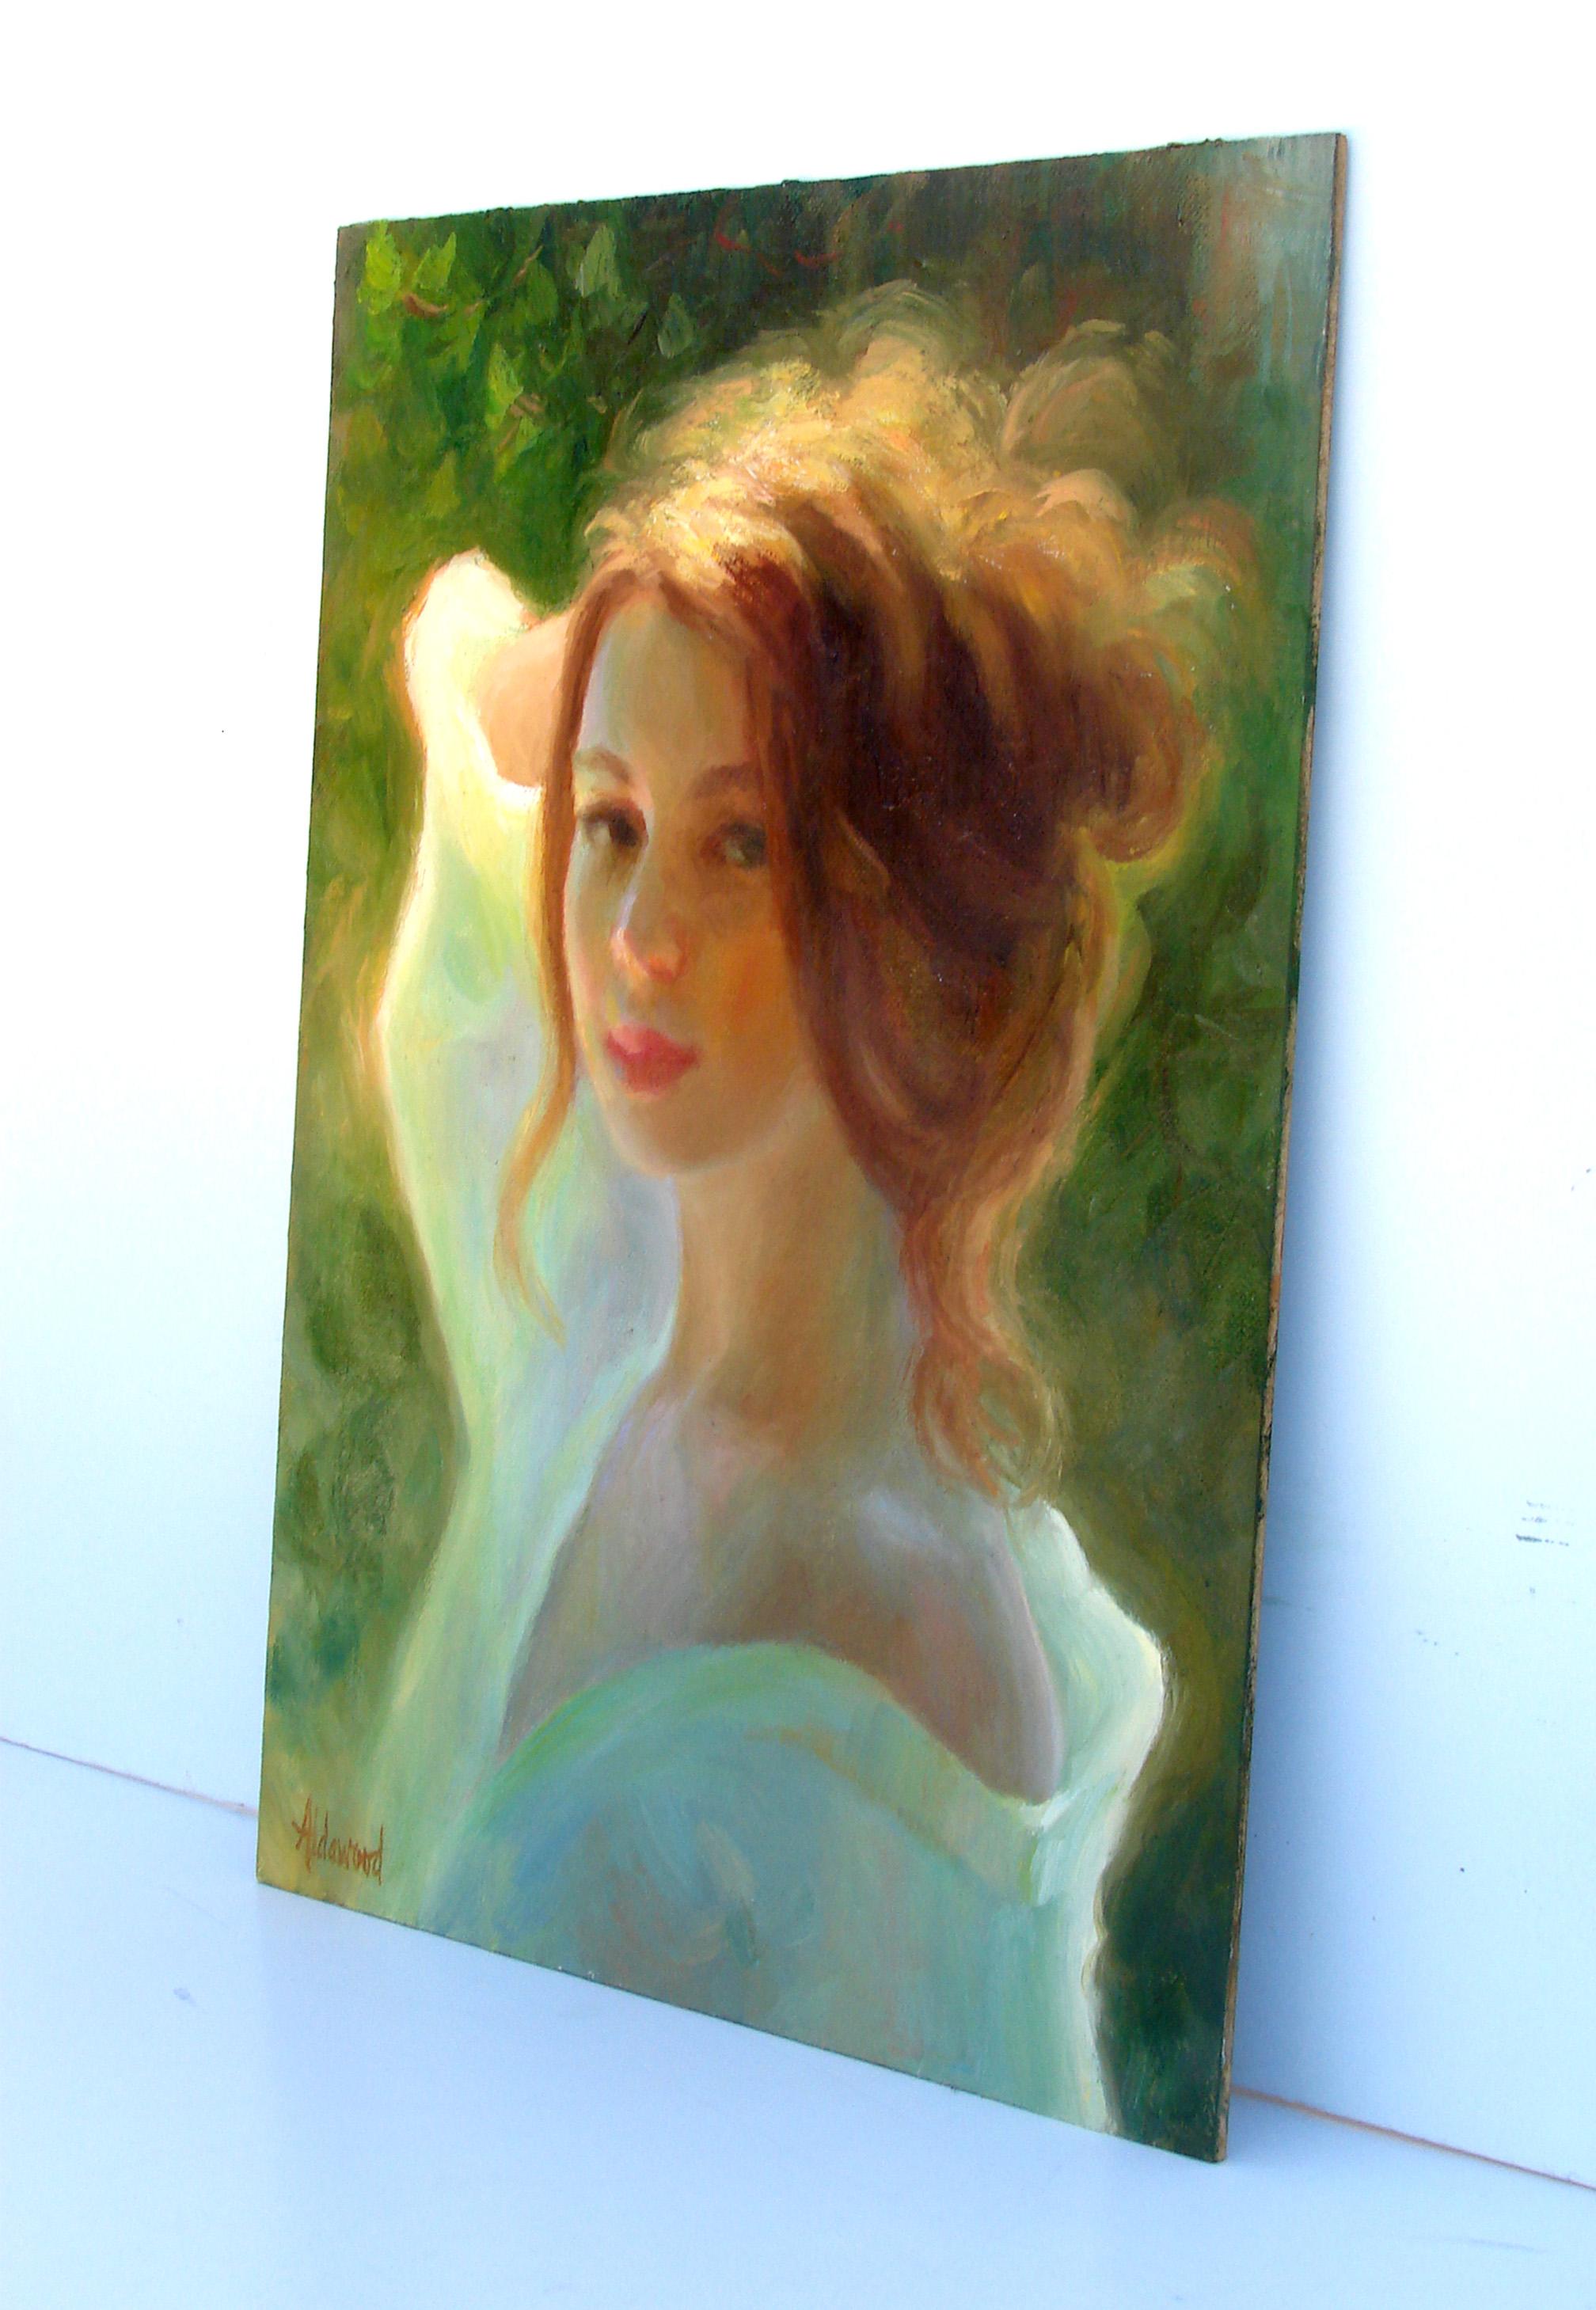 <p>Artist Comments<br>Marion exudes grace and charm with her serene gaze and calm stance. The afternoon sunlight bathes her lush red hair in a soft glow. Soft colors and brushwork impart a classical quality to the composition, capturing harmony